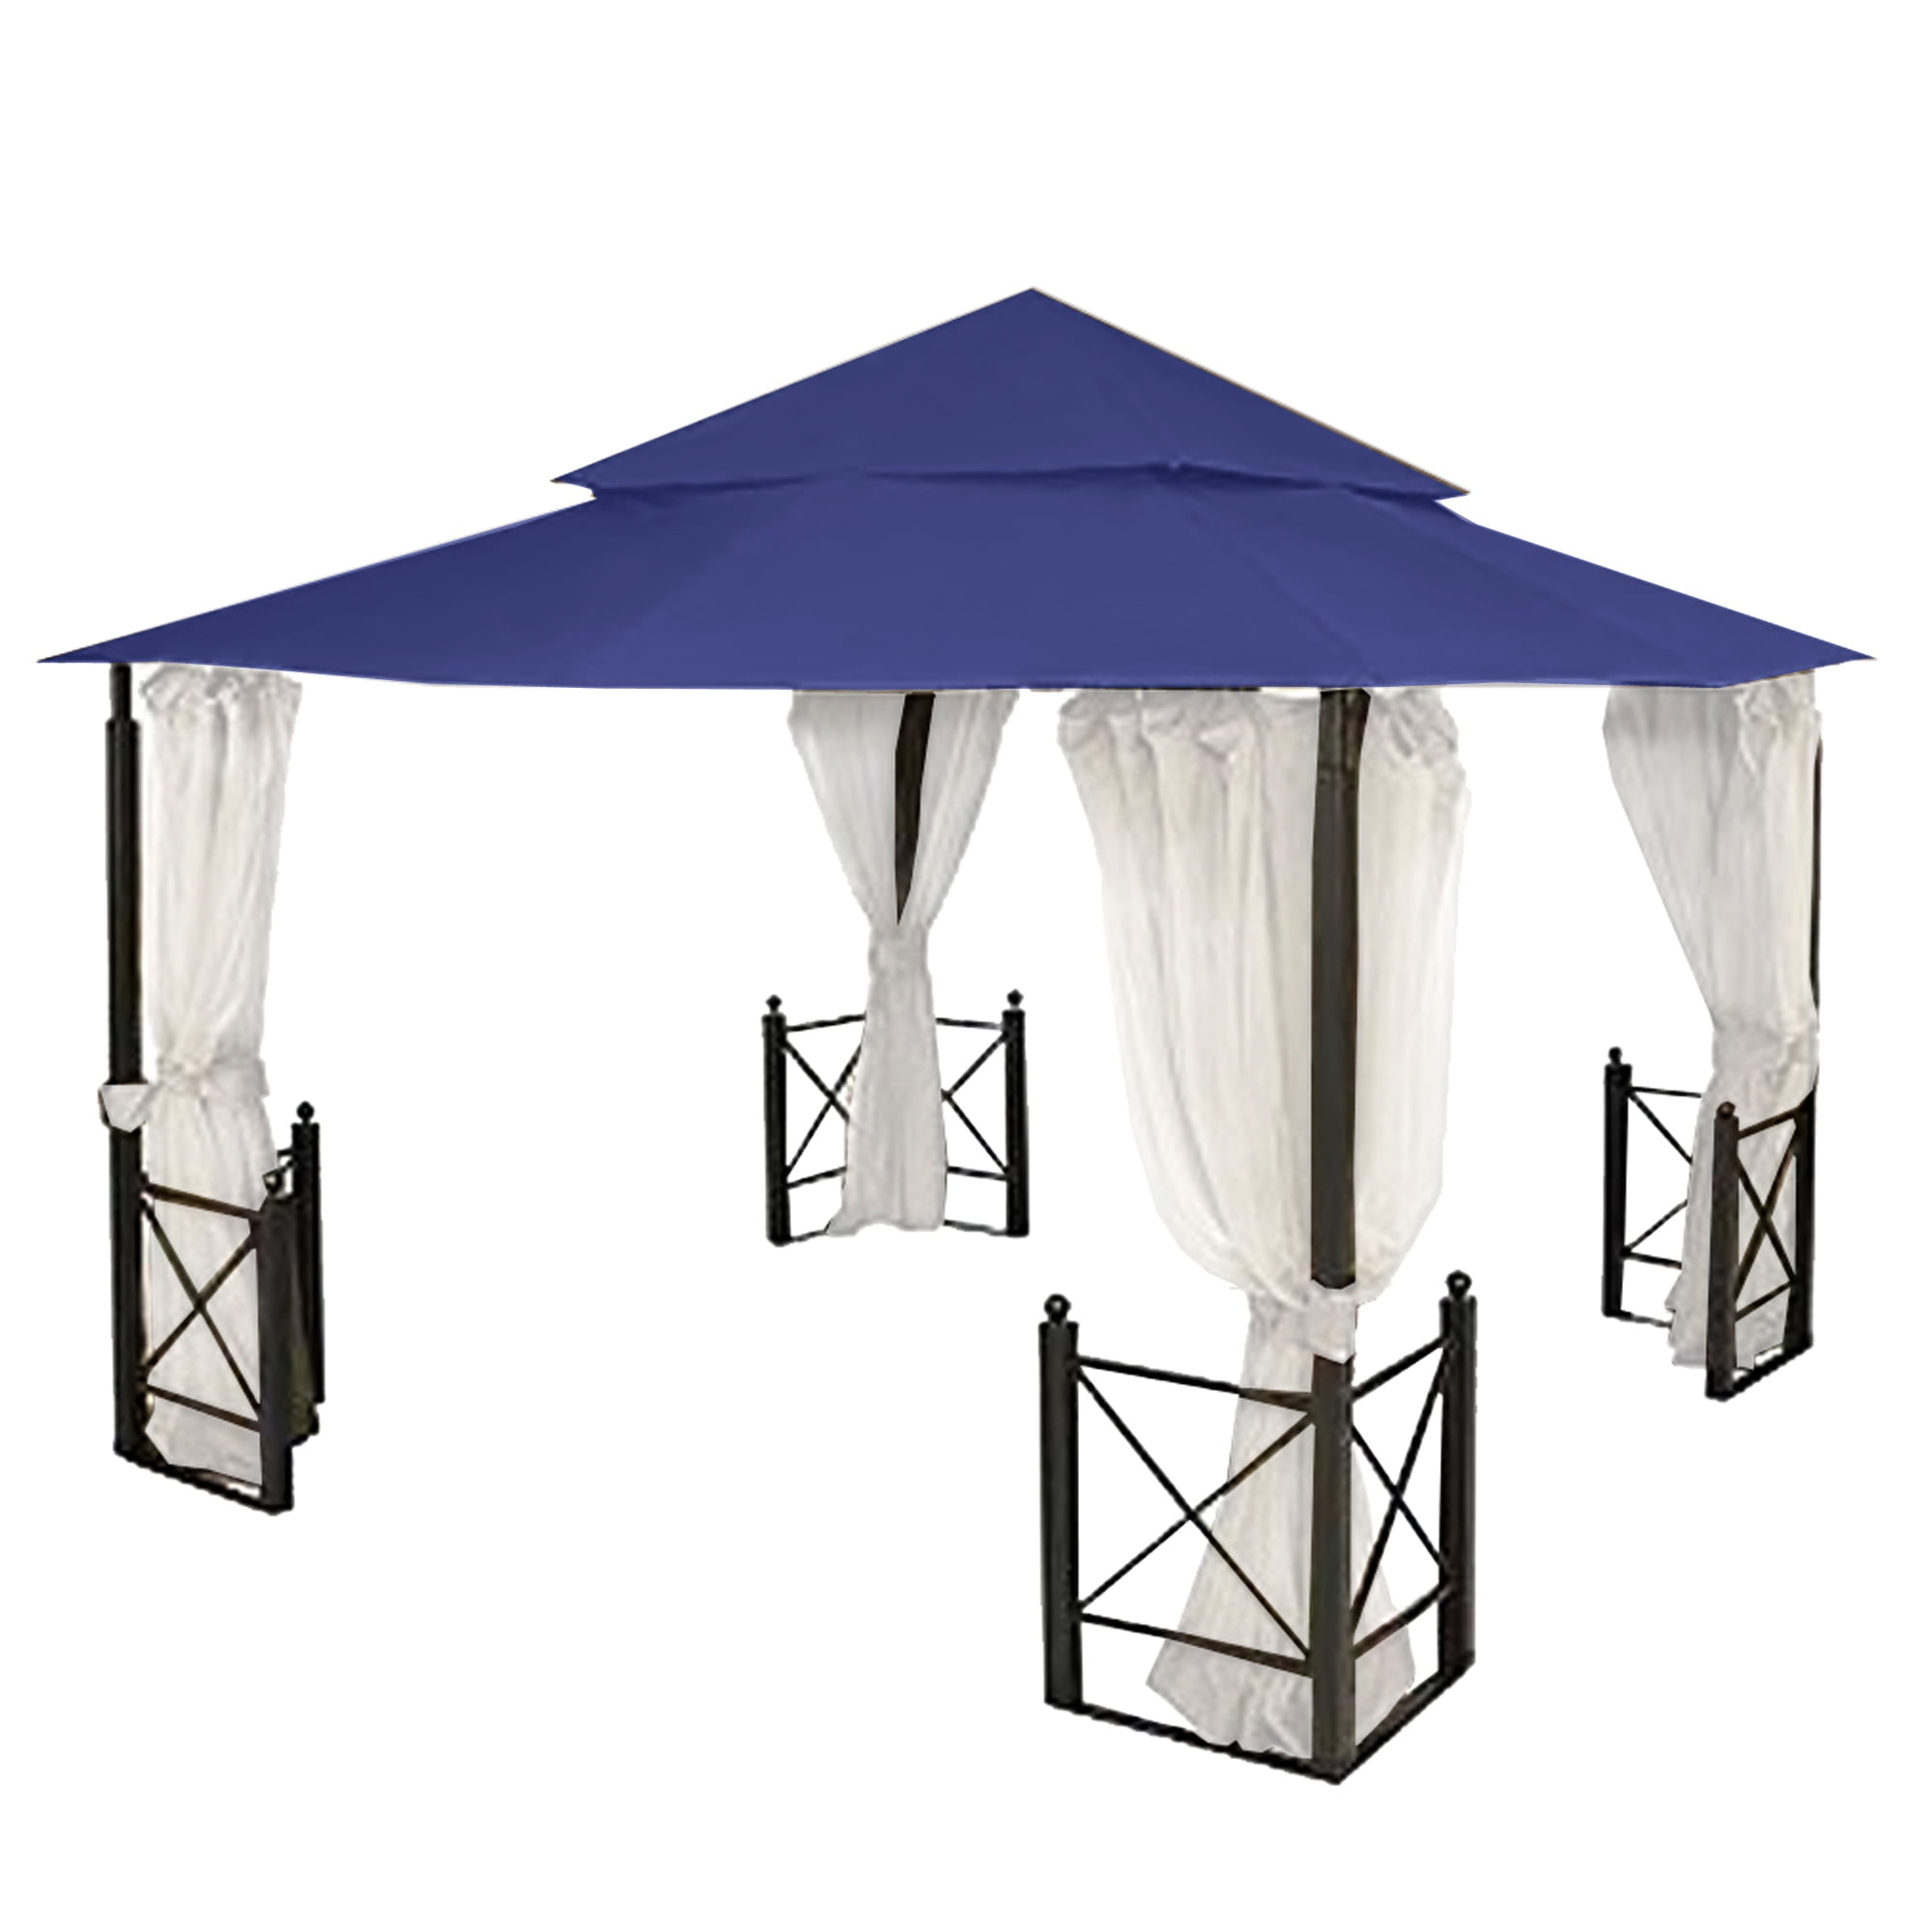 Garden Winds Replacement Canopy Top Cover For The 1239 X 1239 Harbor